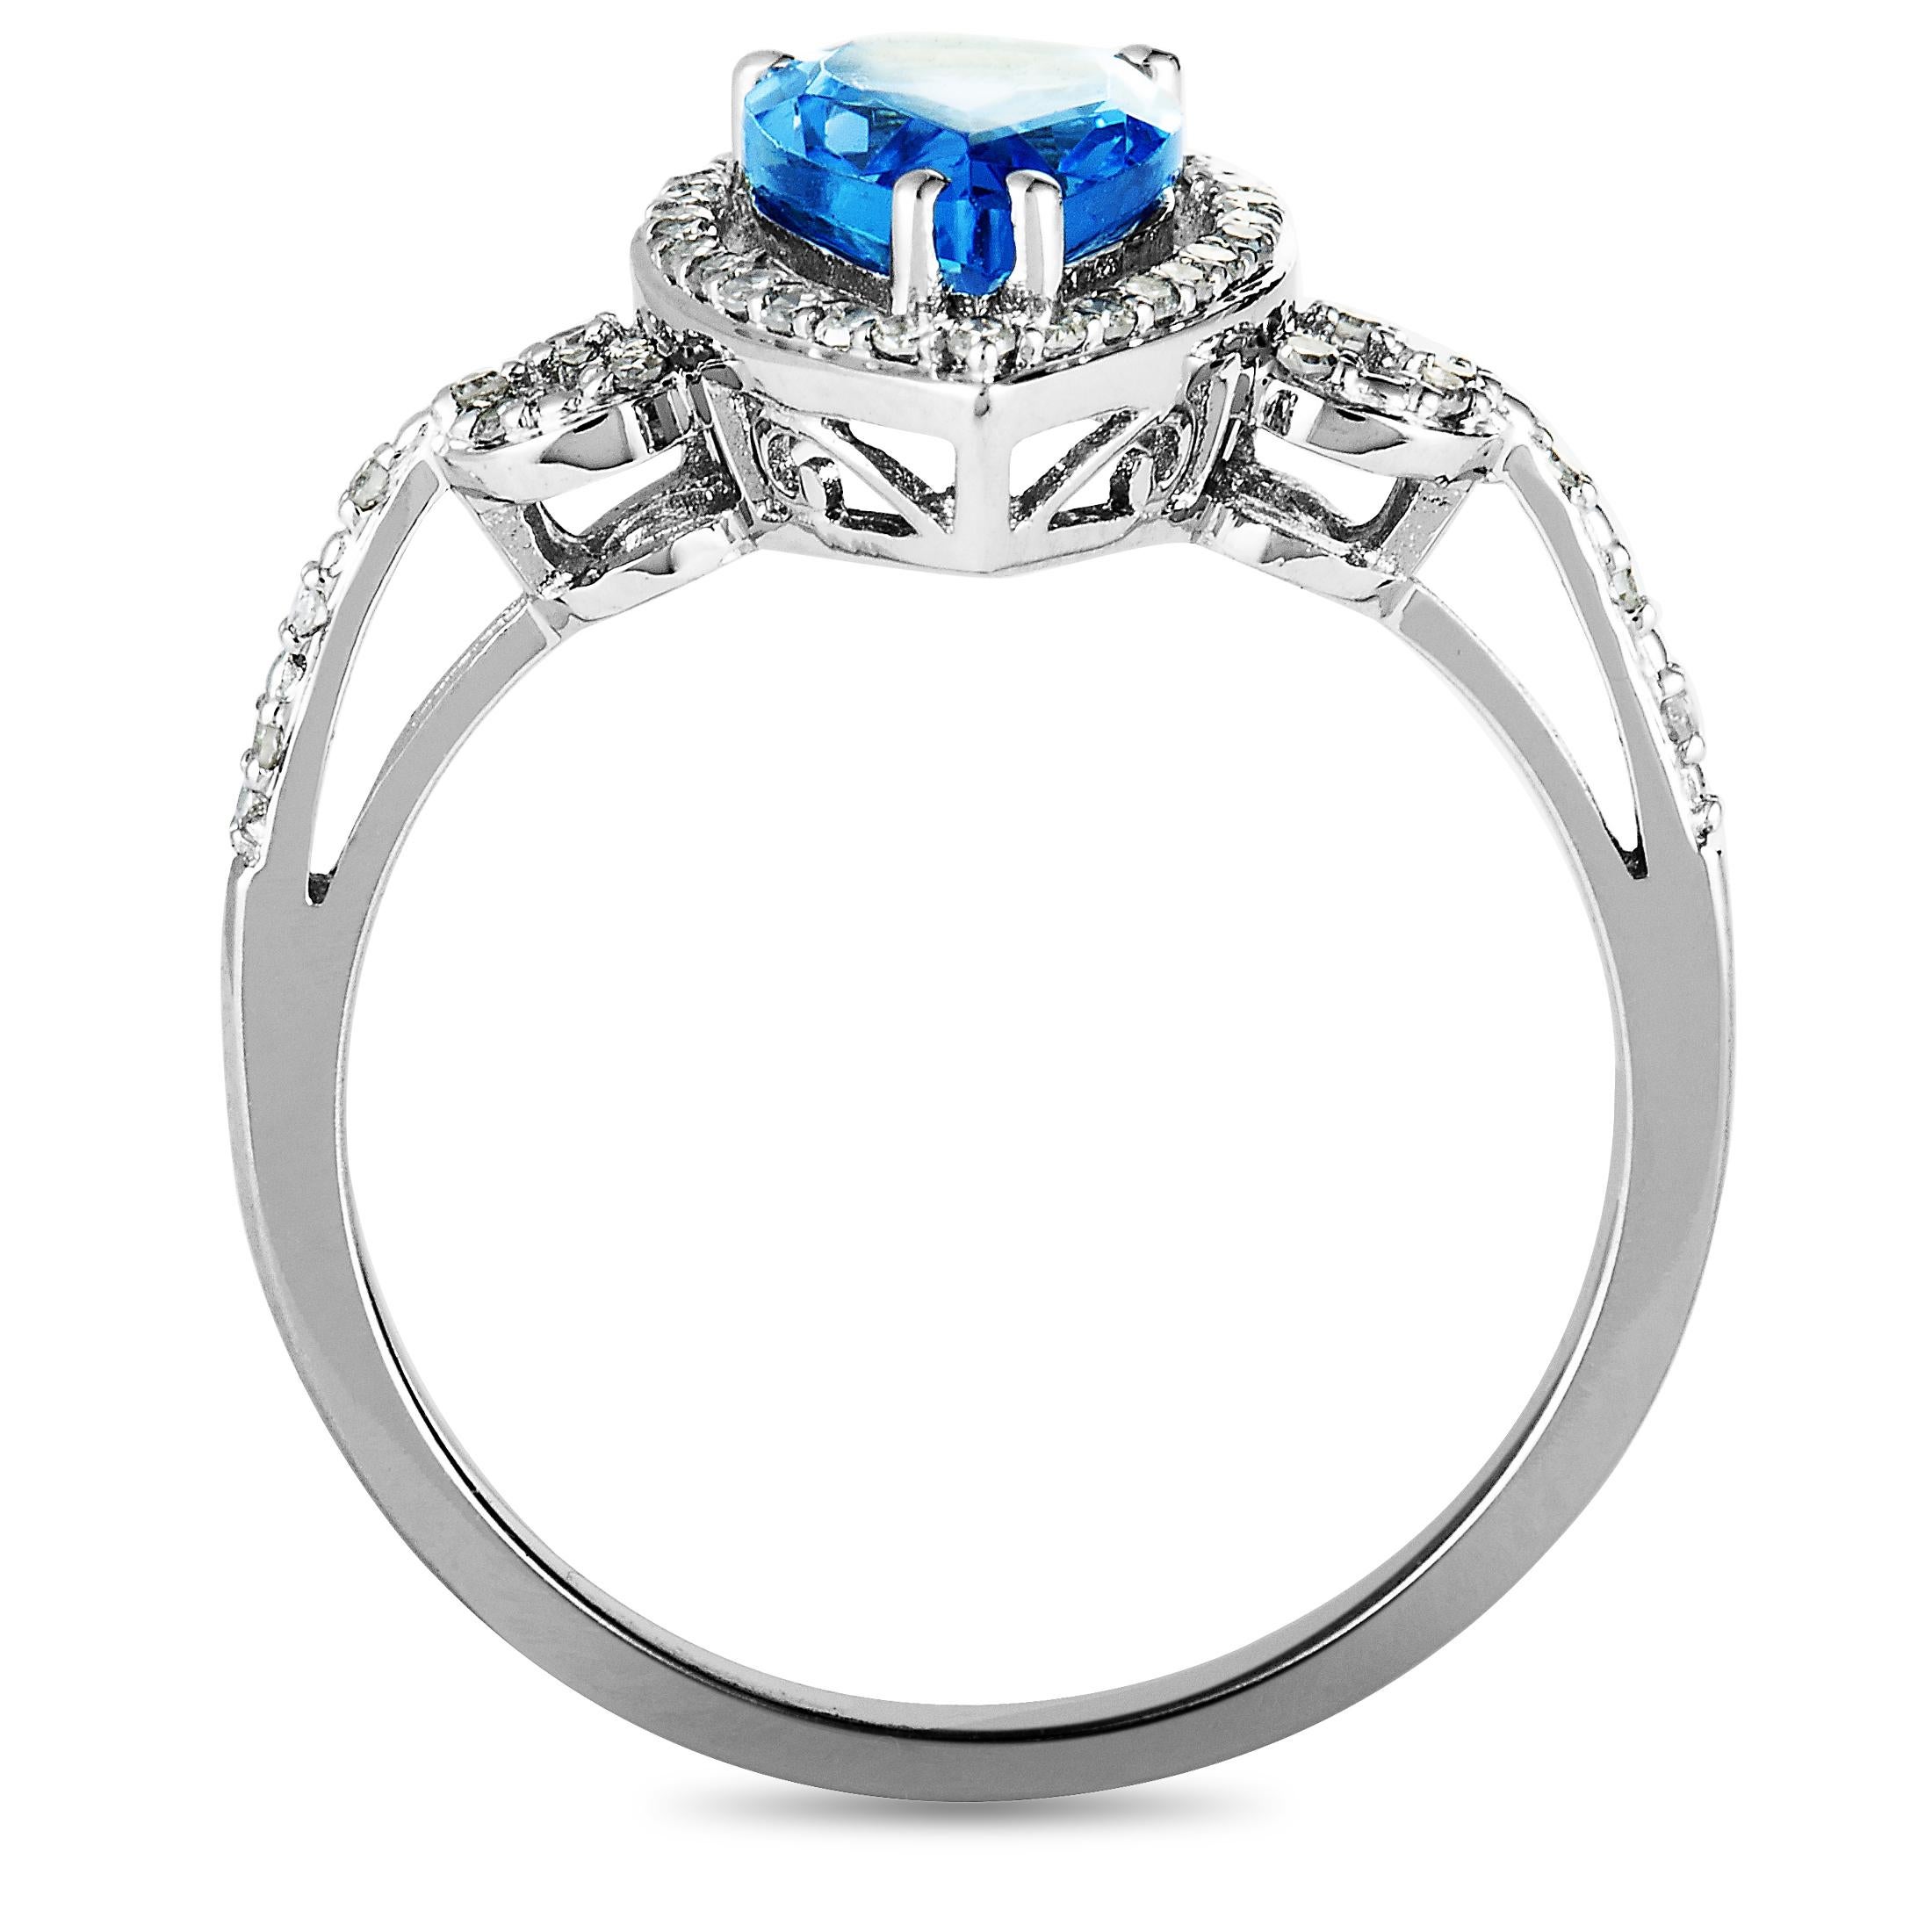 This ring is made of 14K white gold and weighs 2.7 grams, boasting band thickness of 2 mm and top height of 6 mm, while top dimensions measure 20 by 12 mm. The ring is set with a topaz and with a total of 0.17 carats of diamonds.
 
 Offered in brand